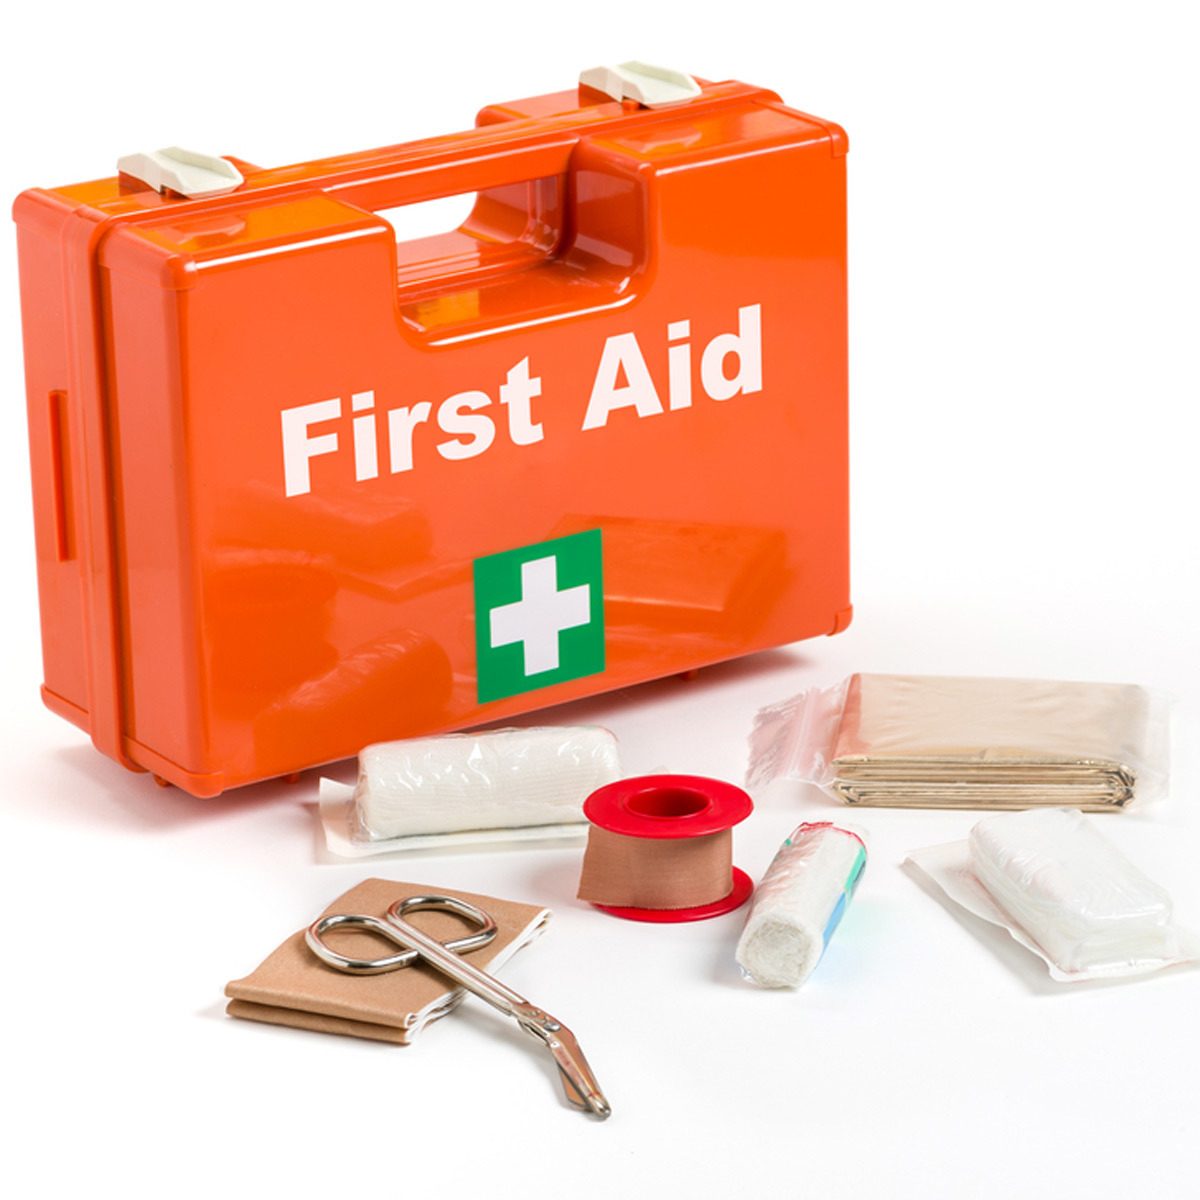 First Aid Kit safety tips